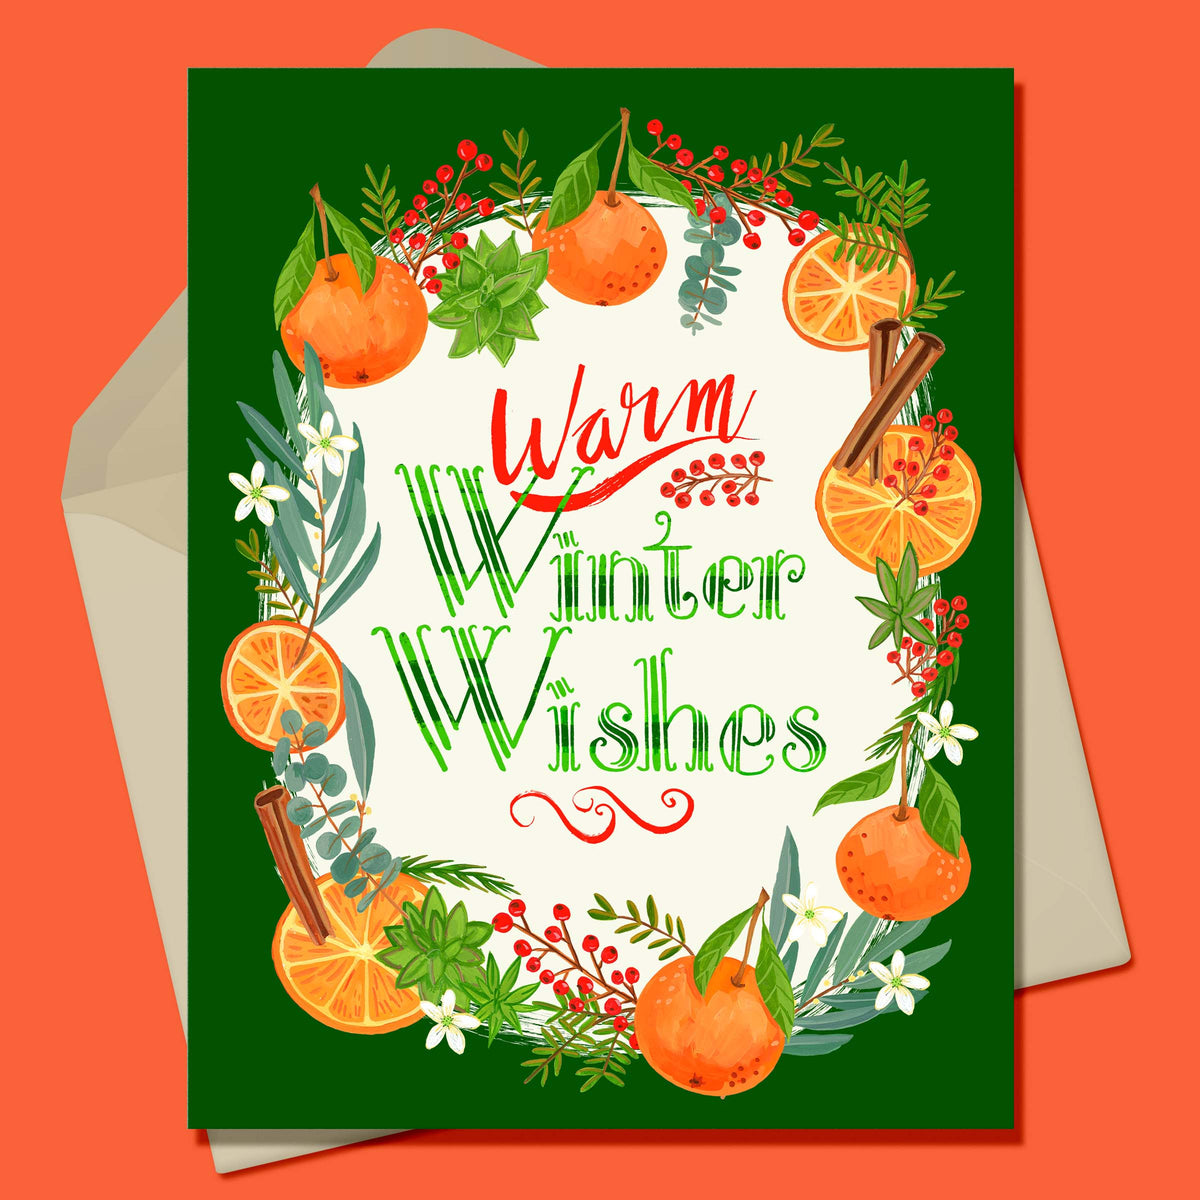 Warm Winter Wishes Greeting Card